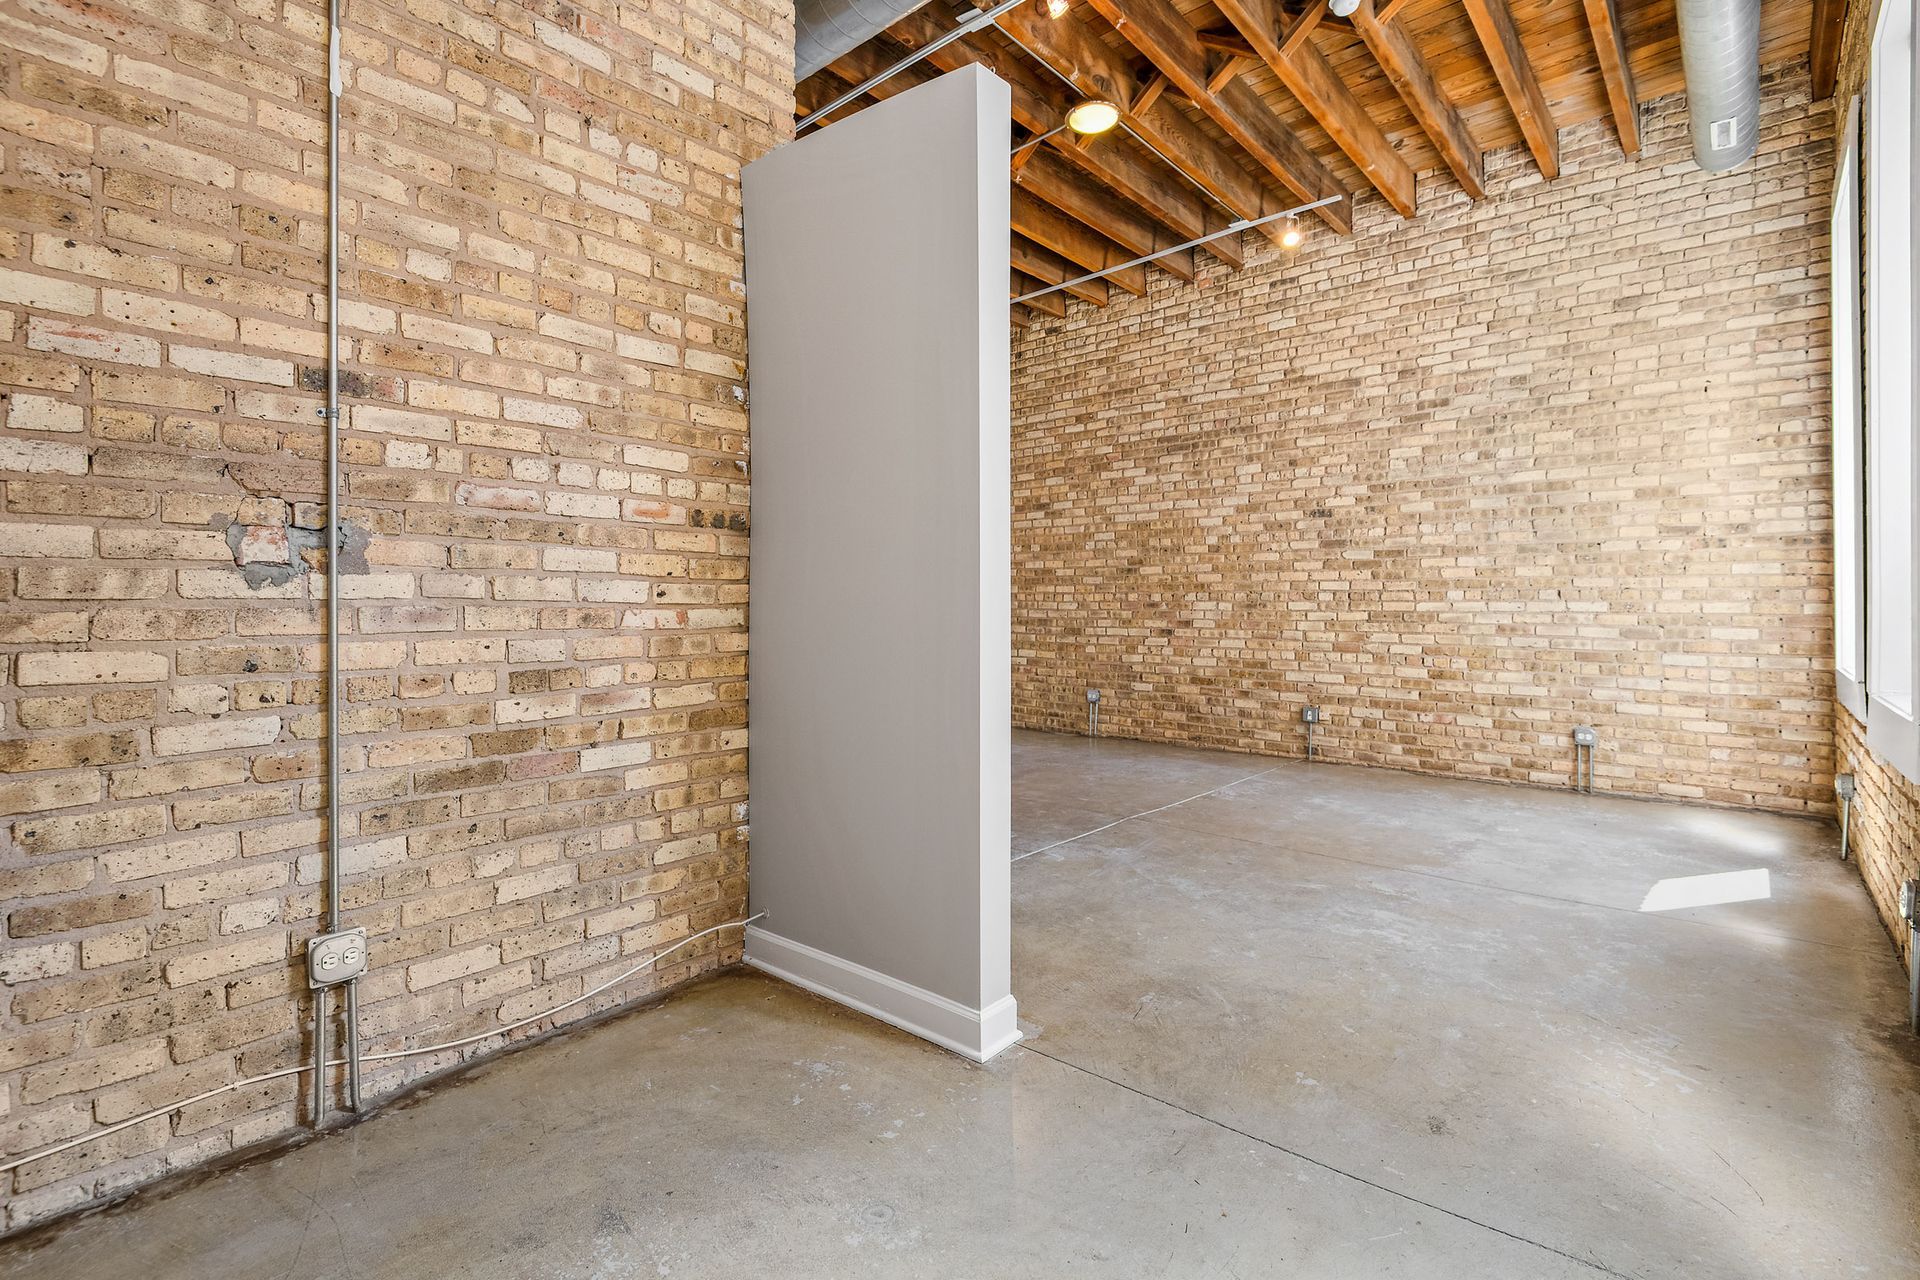 An empty apartment living room with a brick wall and a concrete floor.